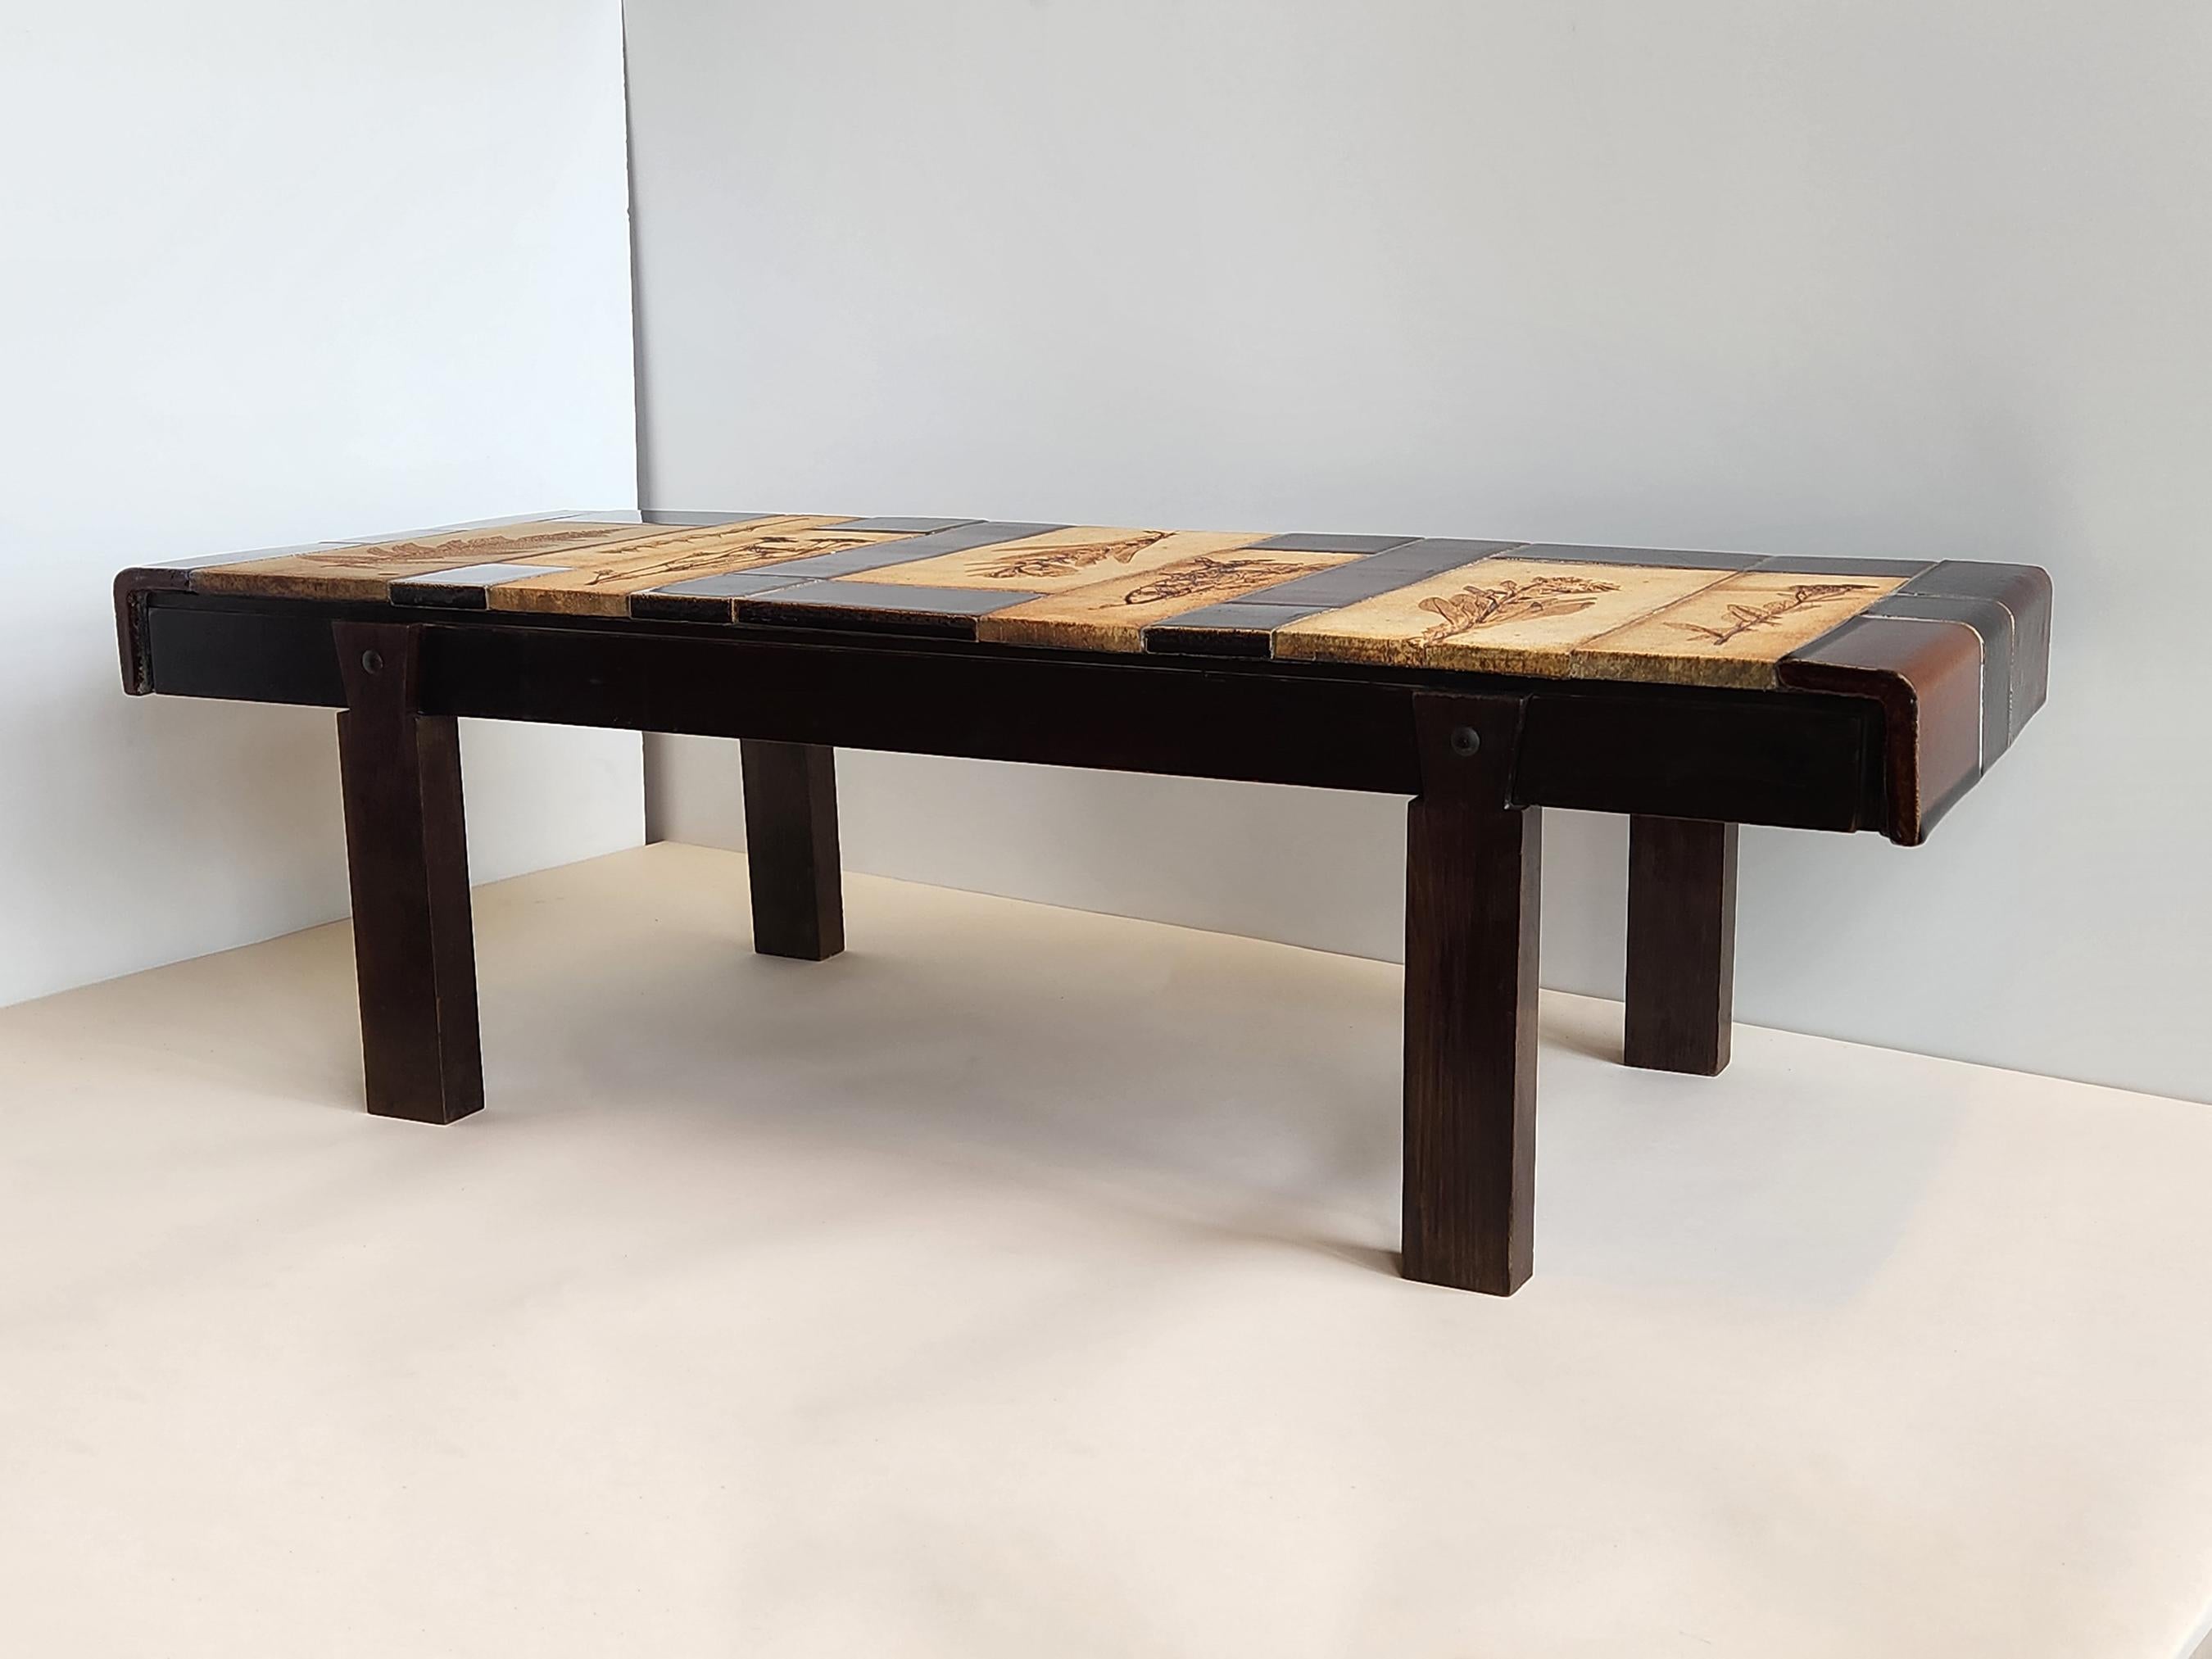 Roger Capron - Coffee Table with Terra Cotta Garrigue and Brown Tiles, 1970s In Good Condition For Sale In Stratford, CT